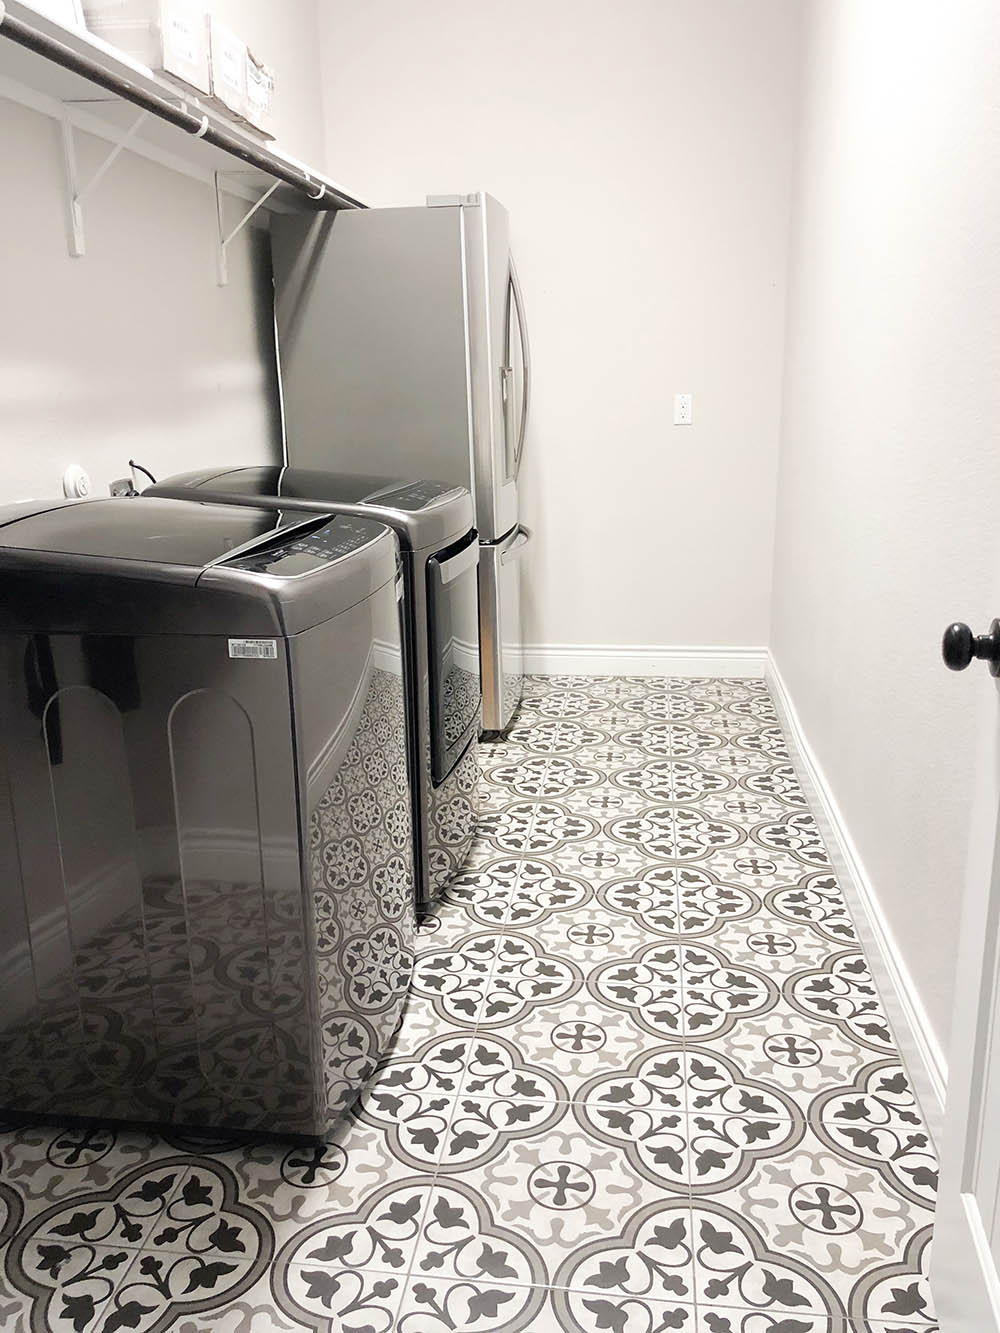 Laundry room with mosaic tiled flooring, black washer and dryer, and a refrigerator. 